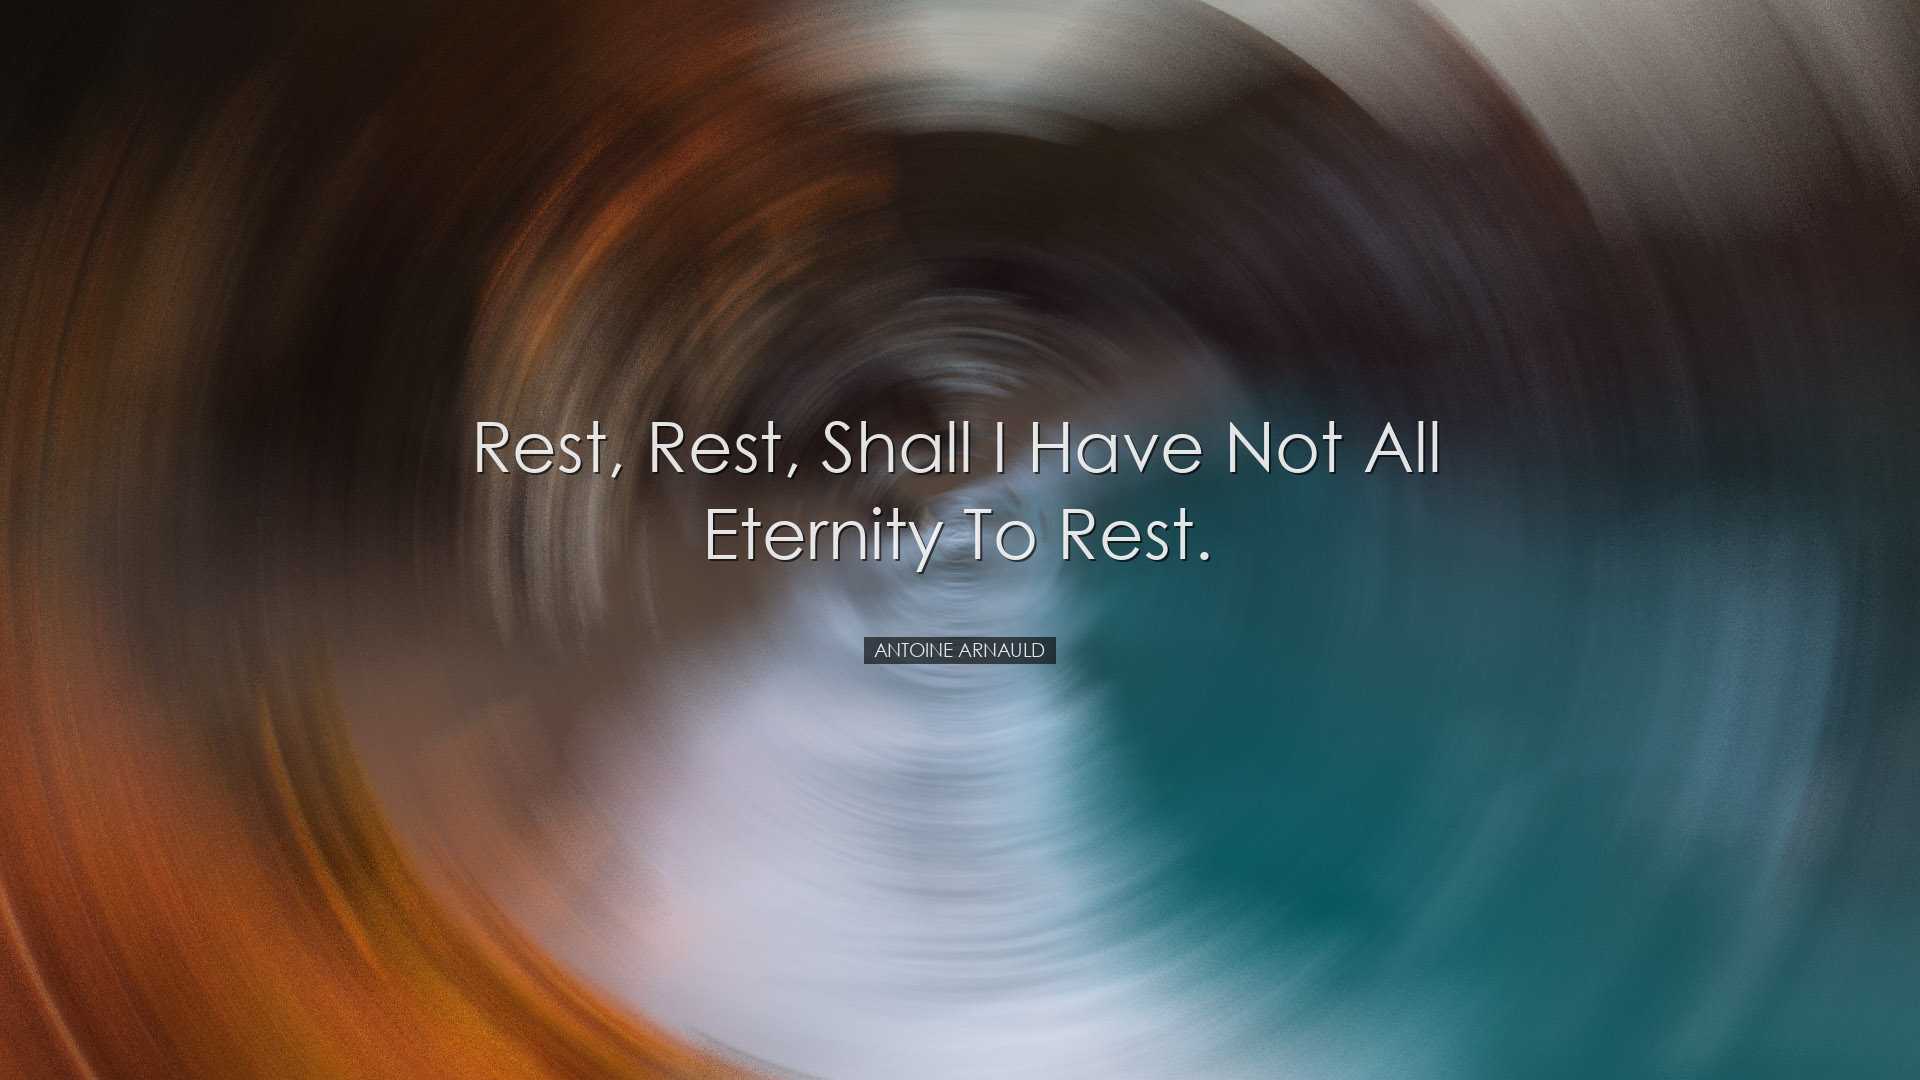 Rest, rest, shall I have not all eternity to rest. - Antoine Arnau